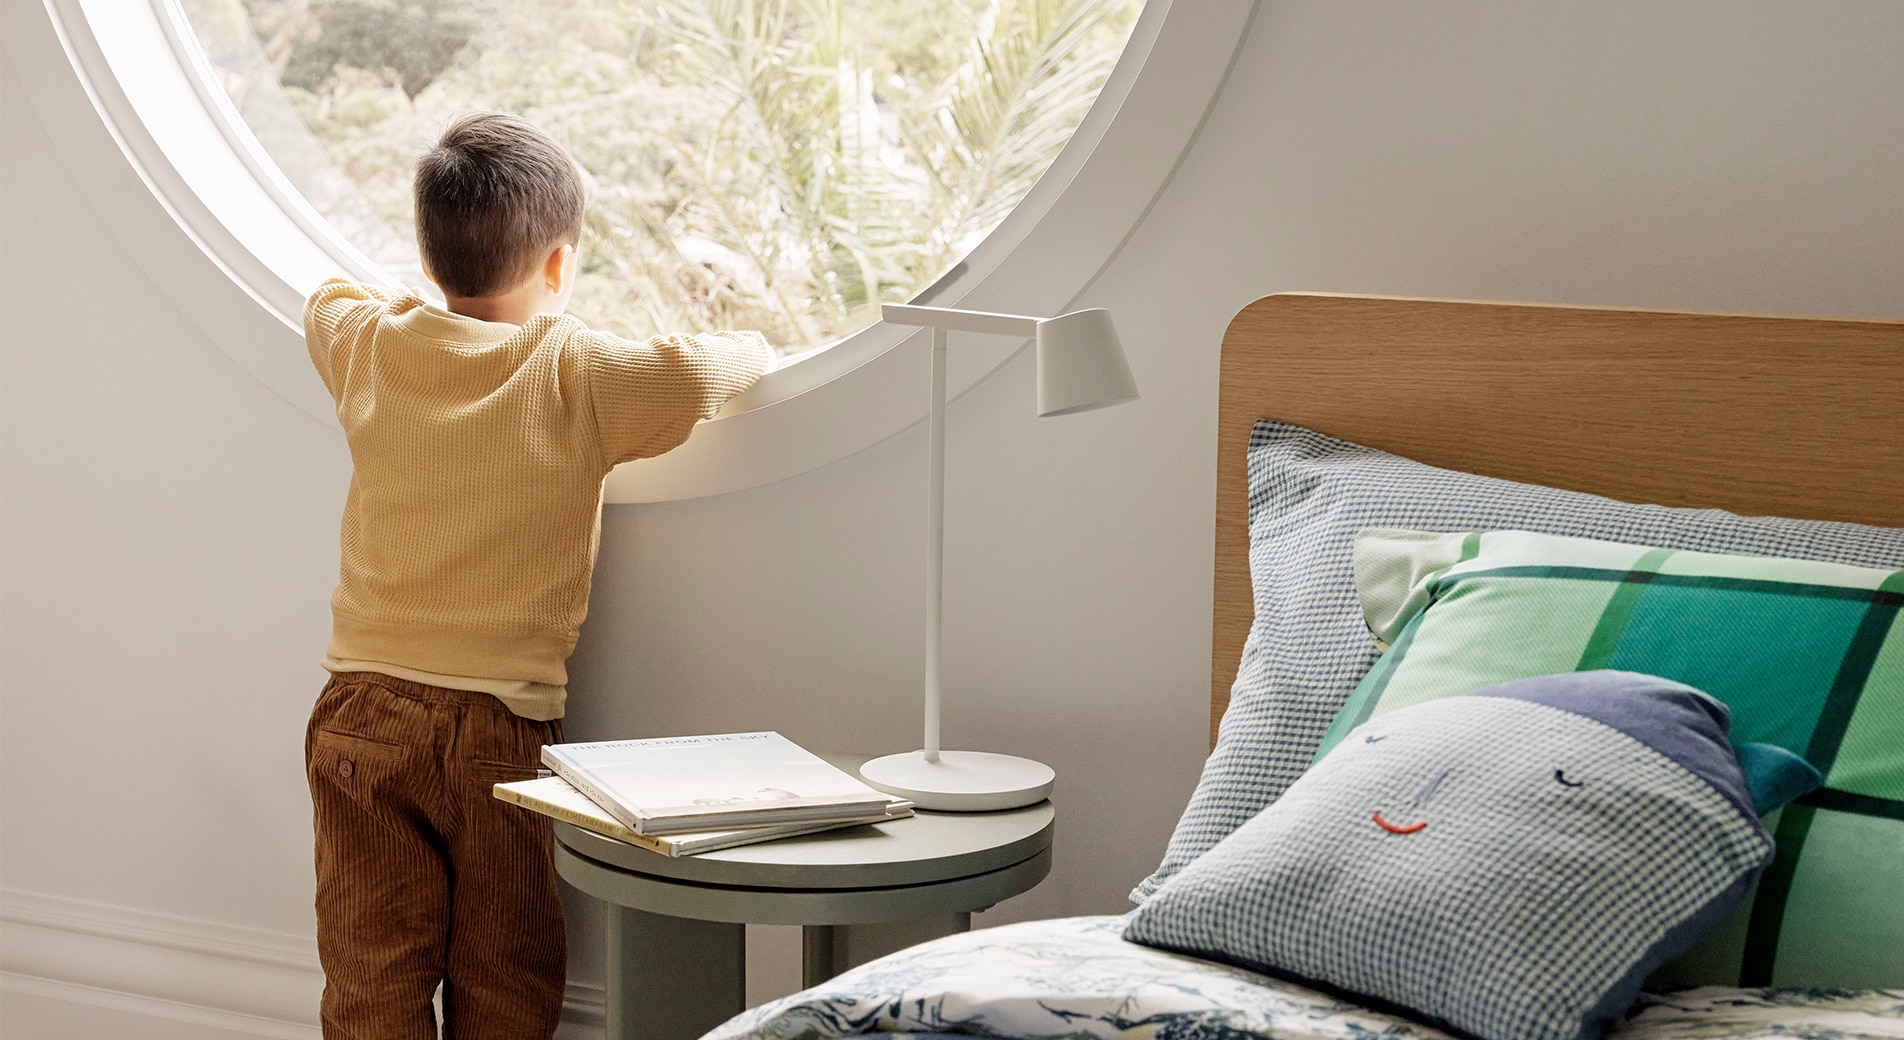 Moving your toddler into a big bed. A child stands in a bedroom looking out of a circular window at trees, next to them is a table with a lamp and books, as well as a bed with green and blue printed sheets and a house-shaped cushion